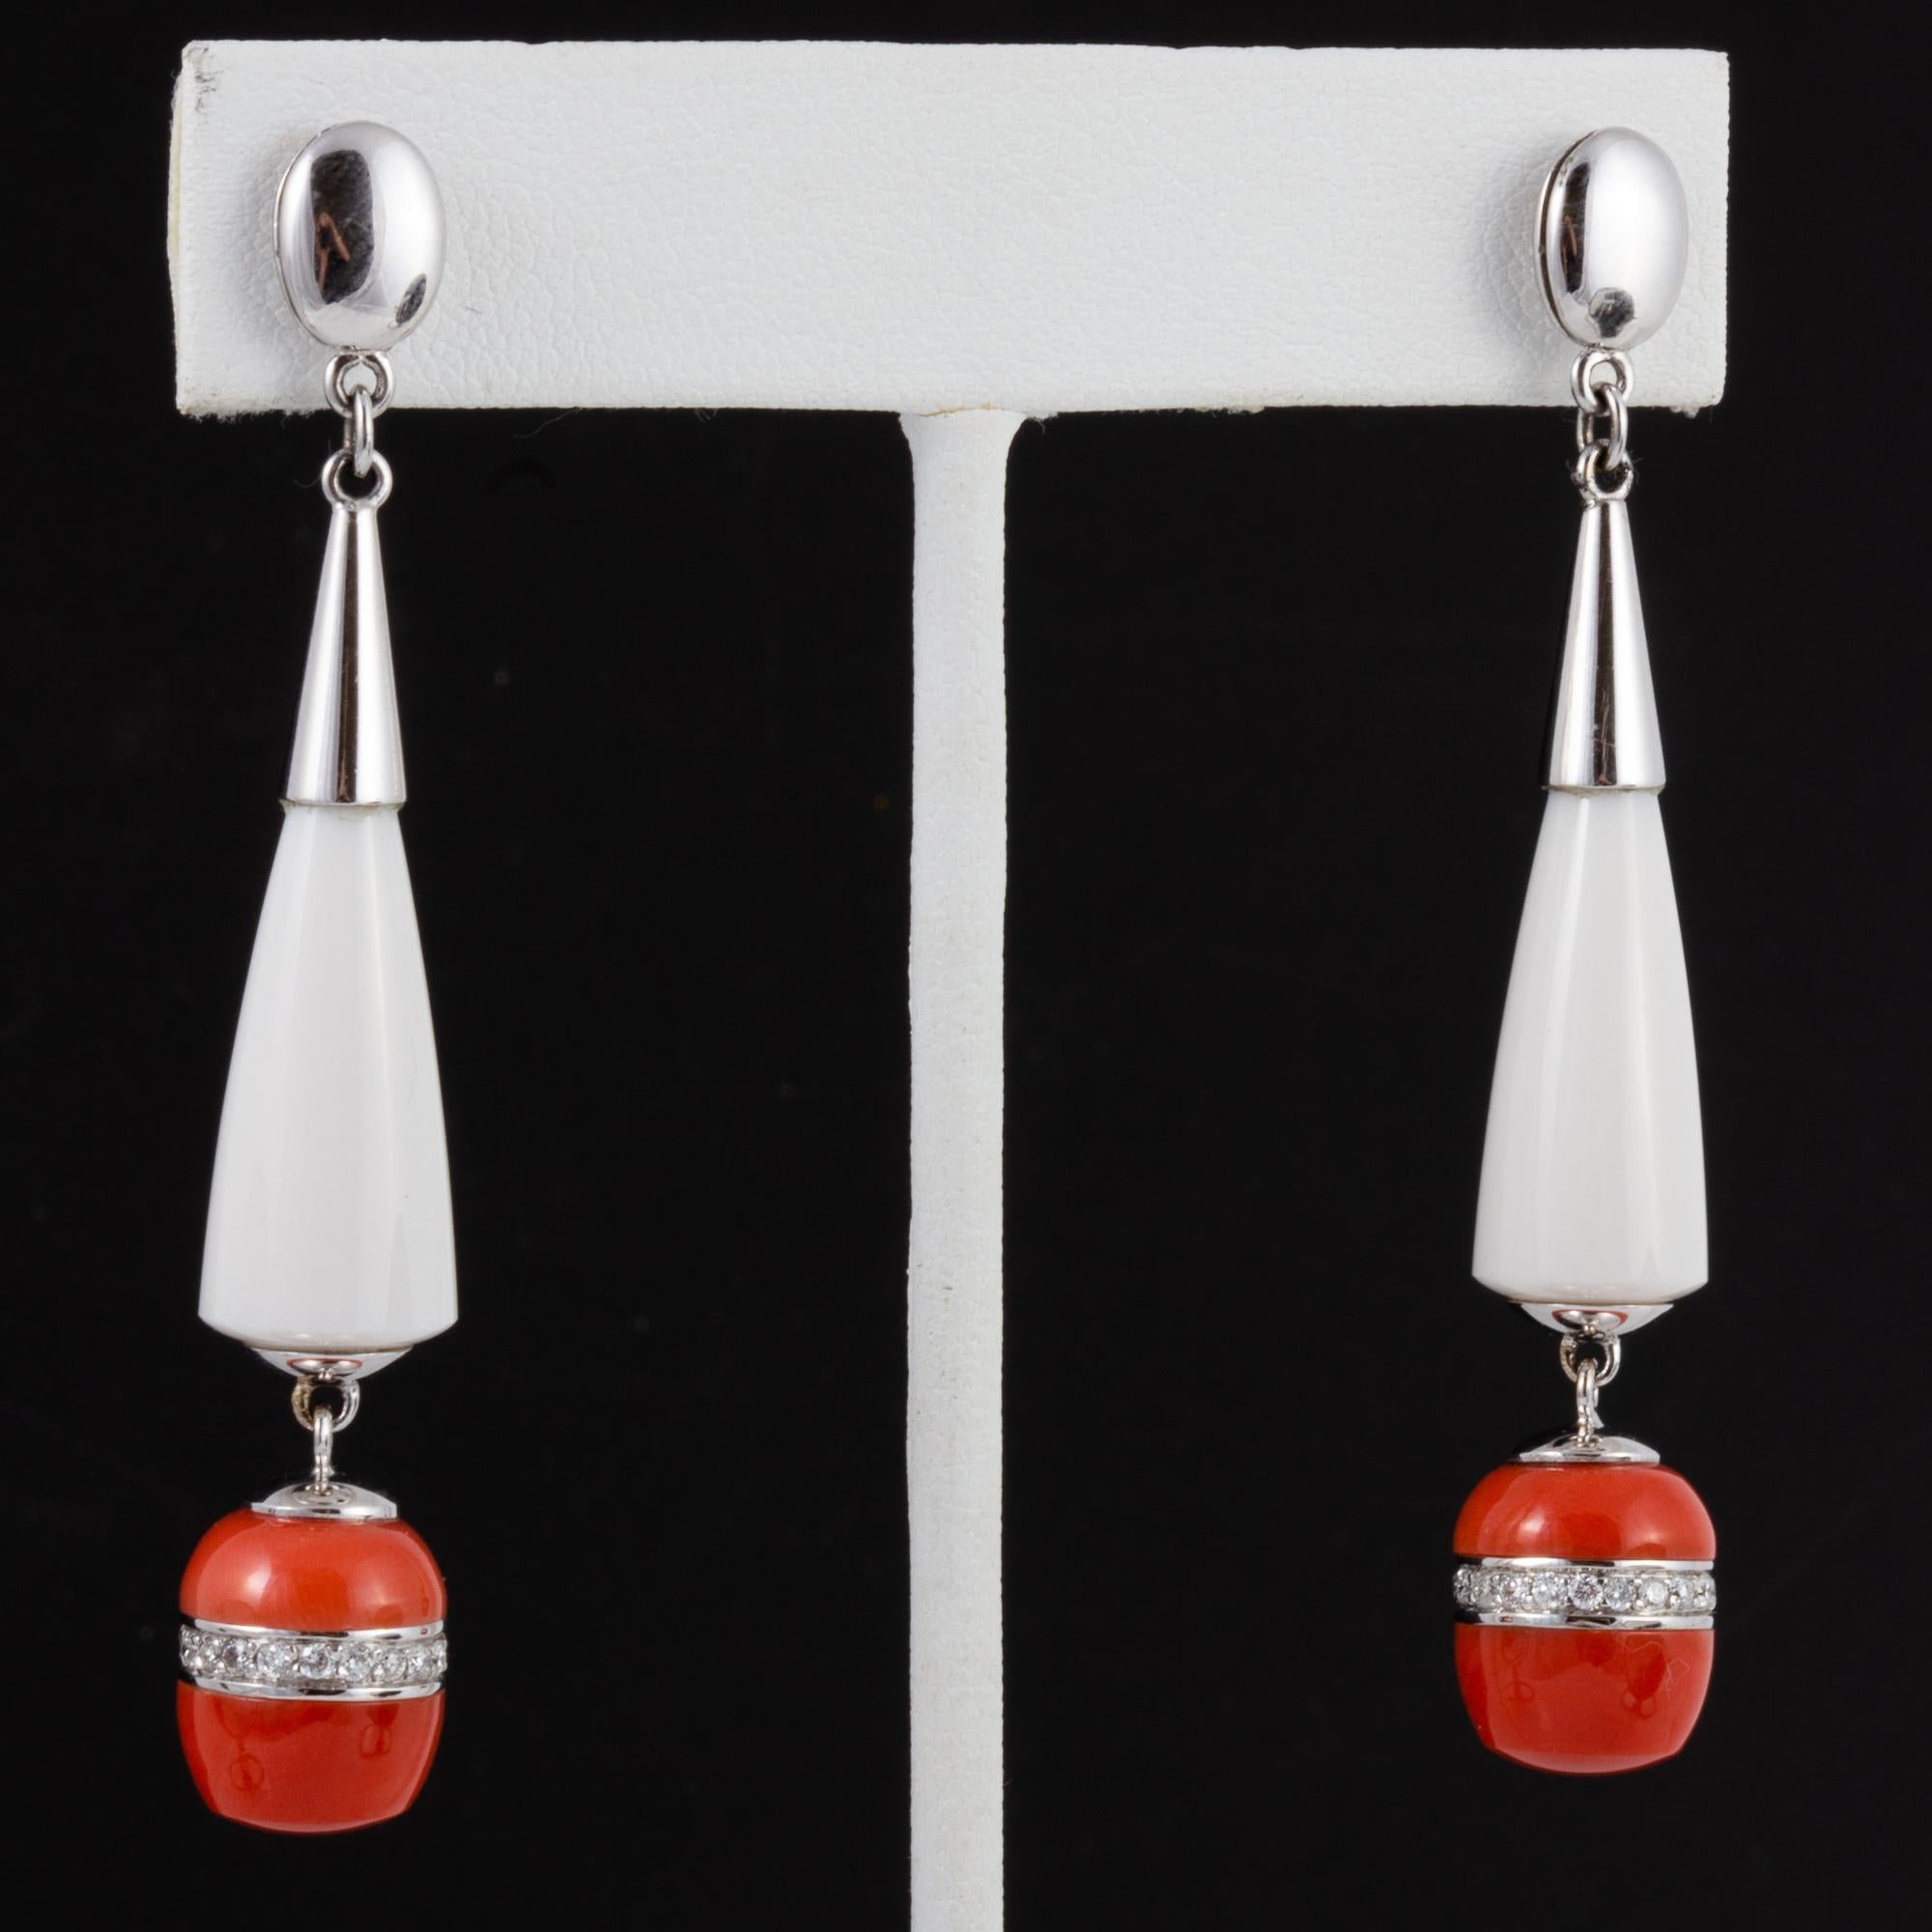 Italian Agate and Coral Earrings, 18 Karat Gold Handcrafted in Milan For Sale 4